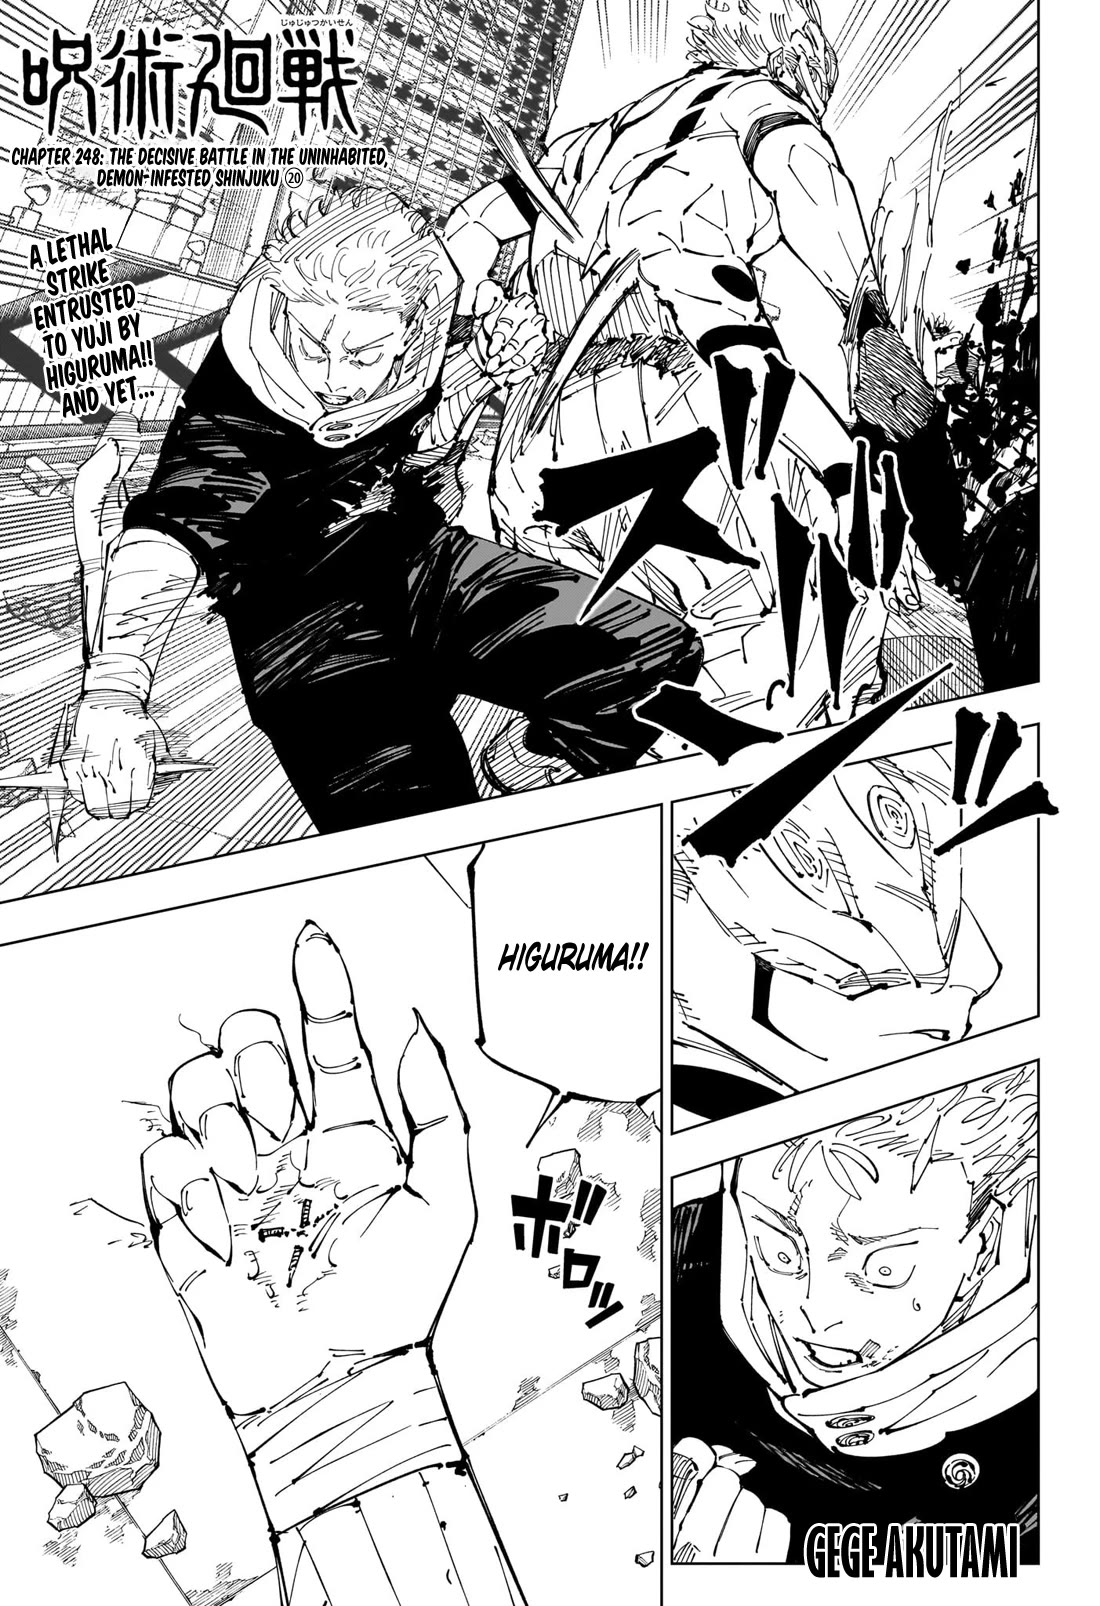 Jujutsu Kaisen Chapter 248: The Decisive Battle In The Uninhabited, Demon-Infested Shinjuku ⑳ - Picture 1